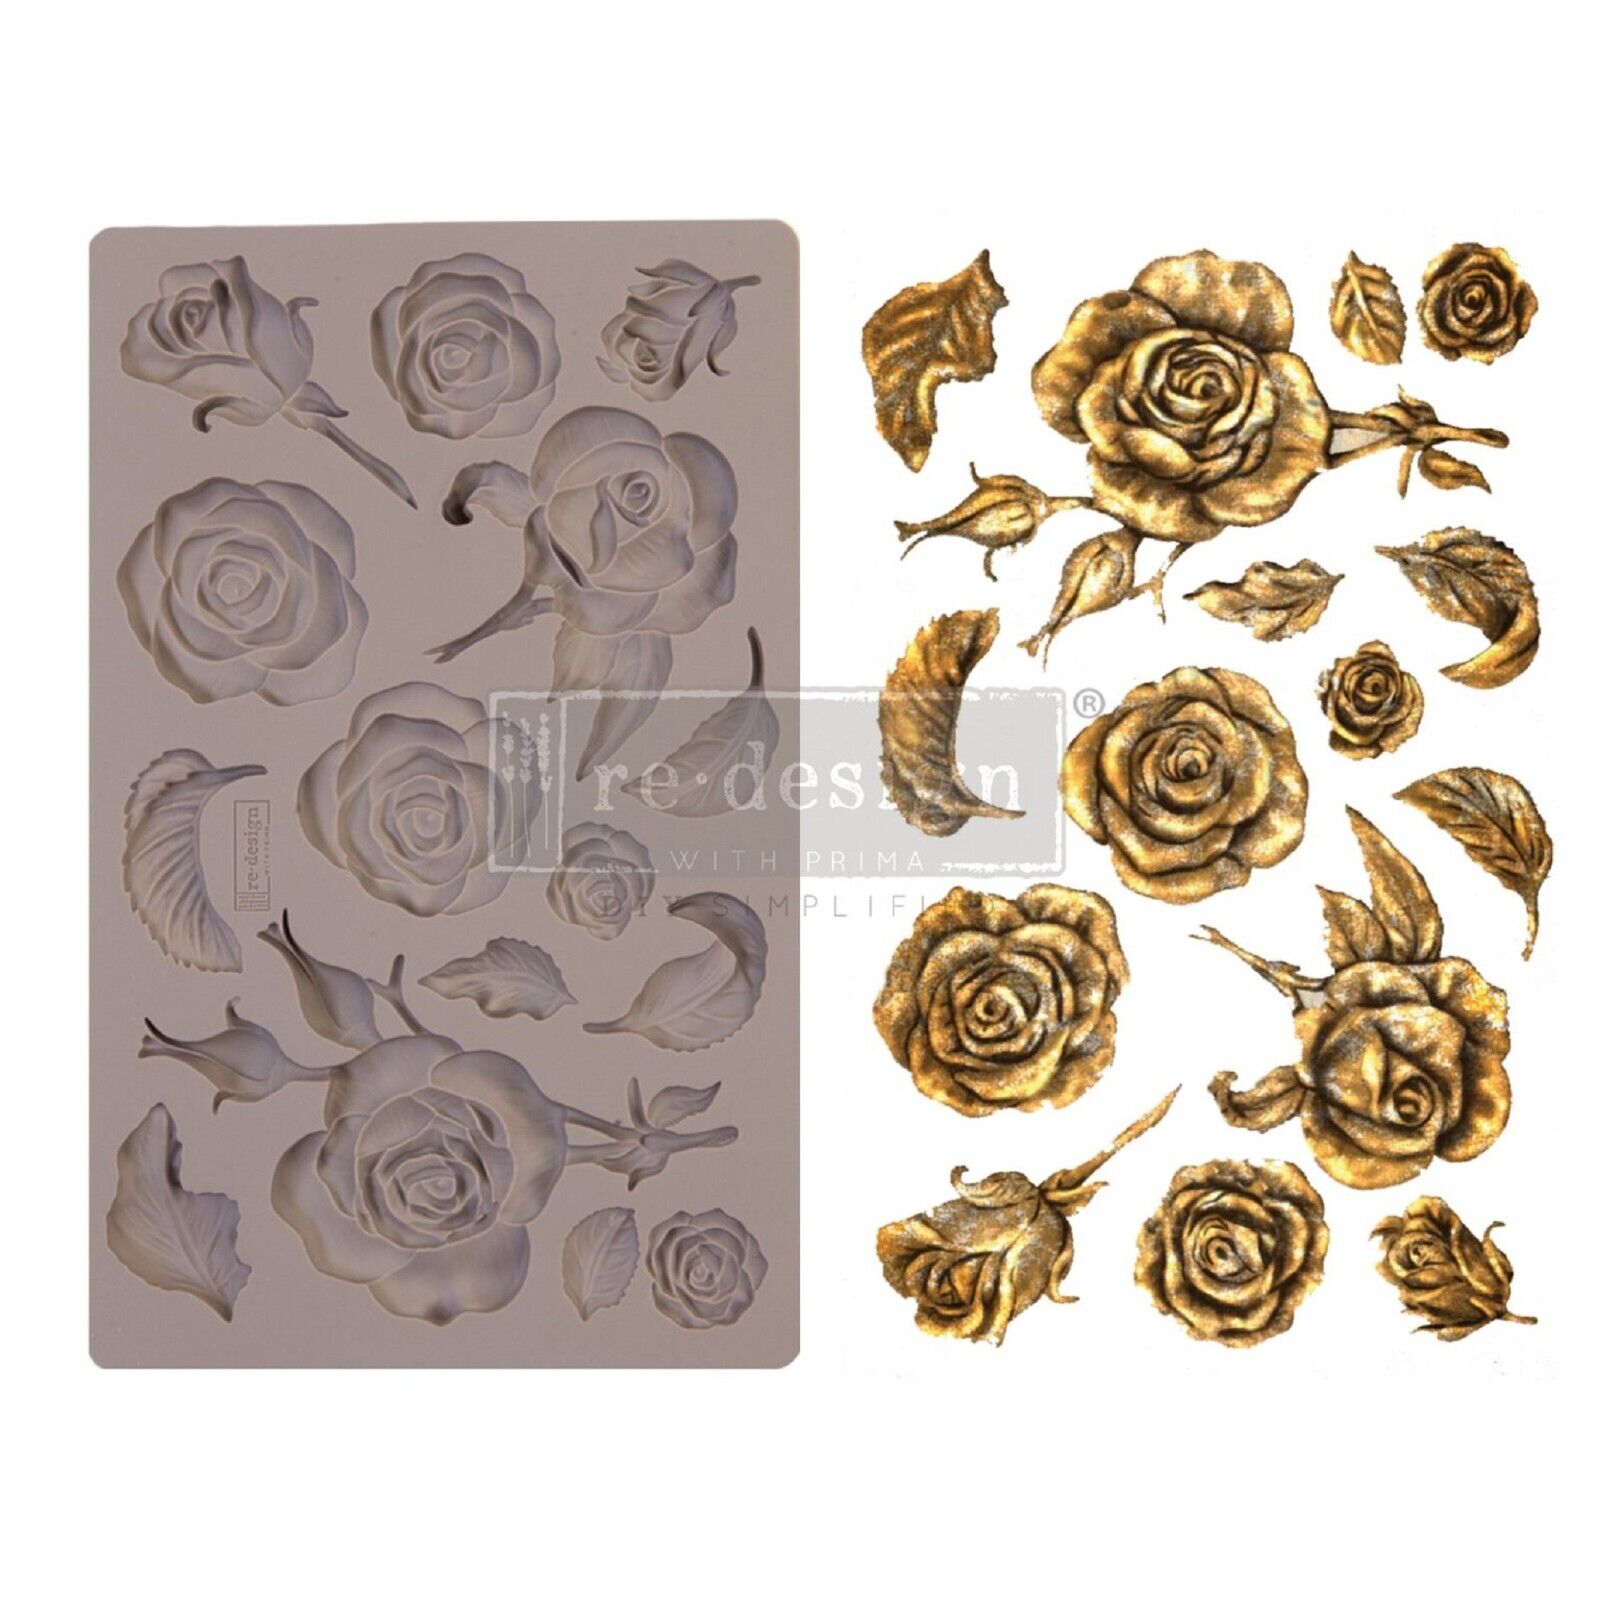 Redesign With Prima Botanist Floral Decor Mould Silicone Mold 5x8" #643072